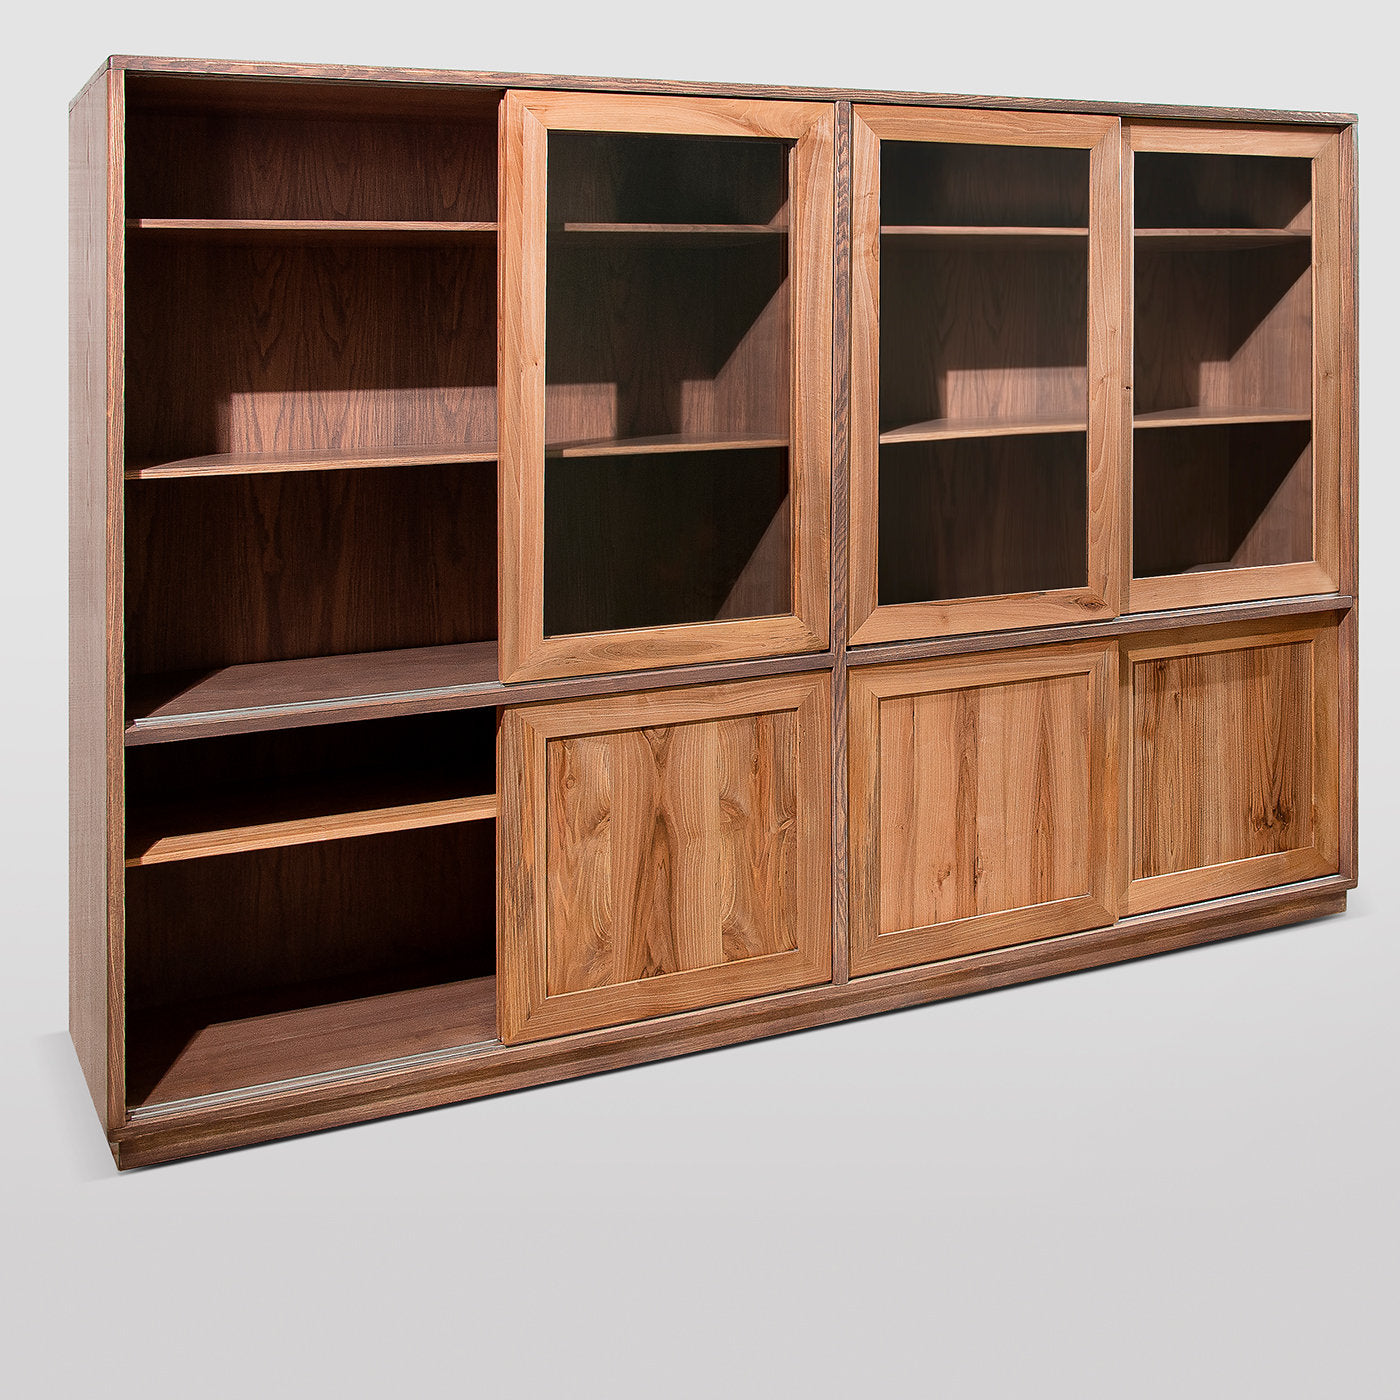 Nordic-Style Modular Bookcase with Sliding Doors - Alternative view 4